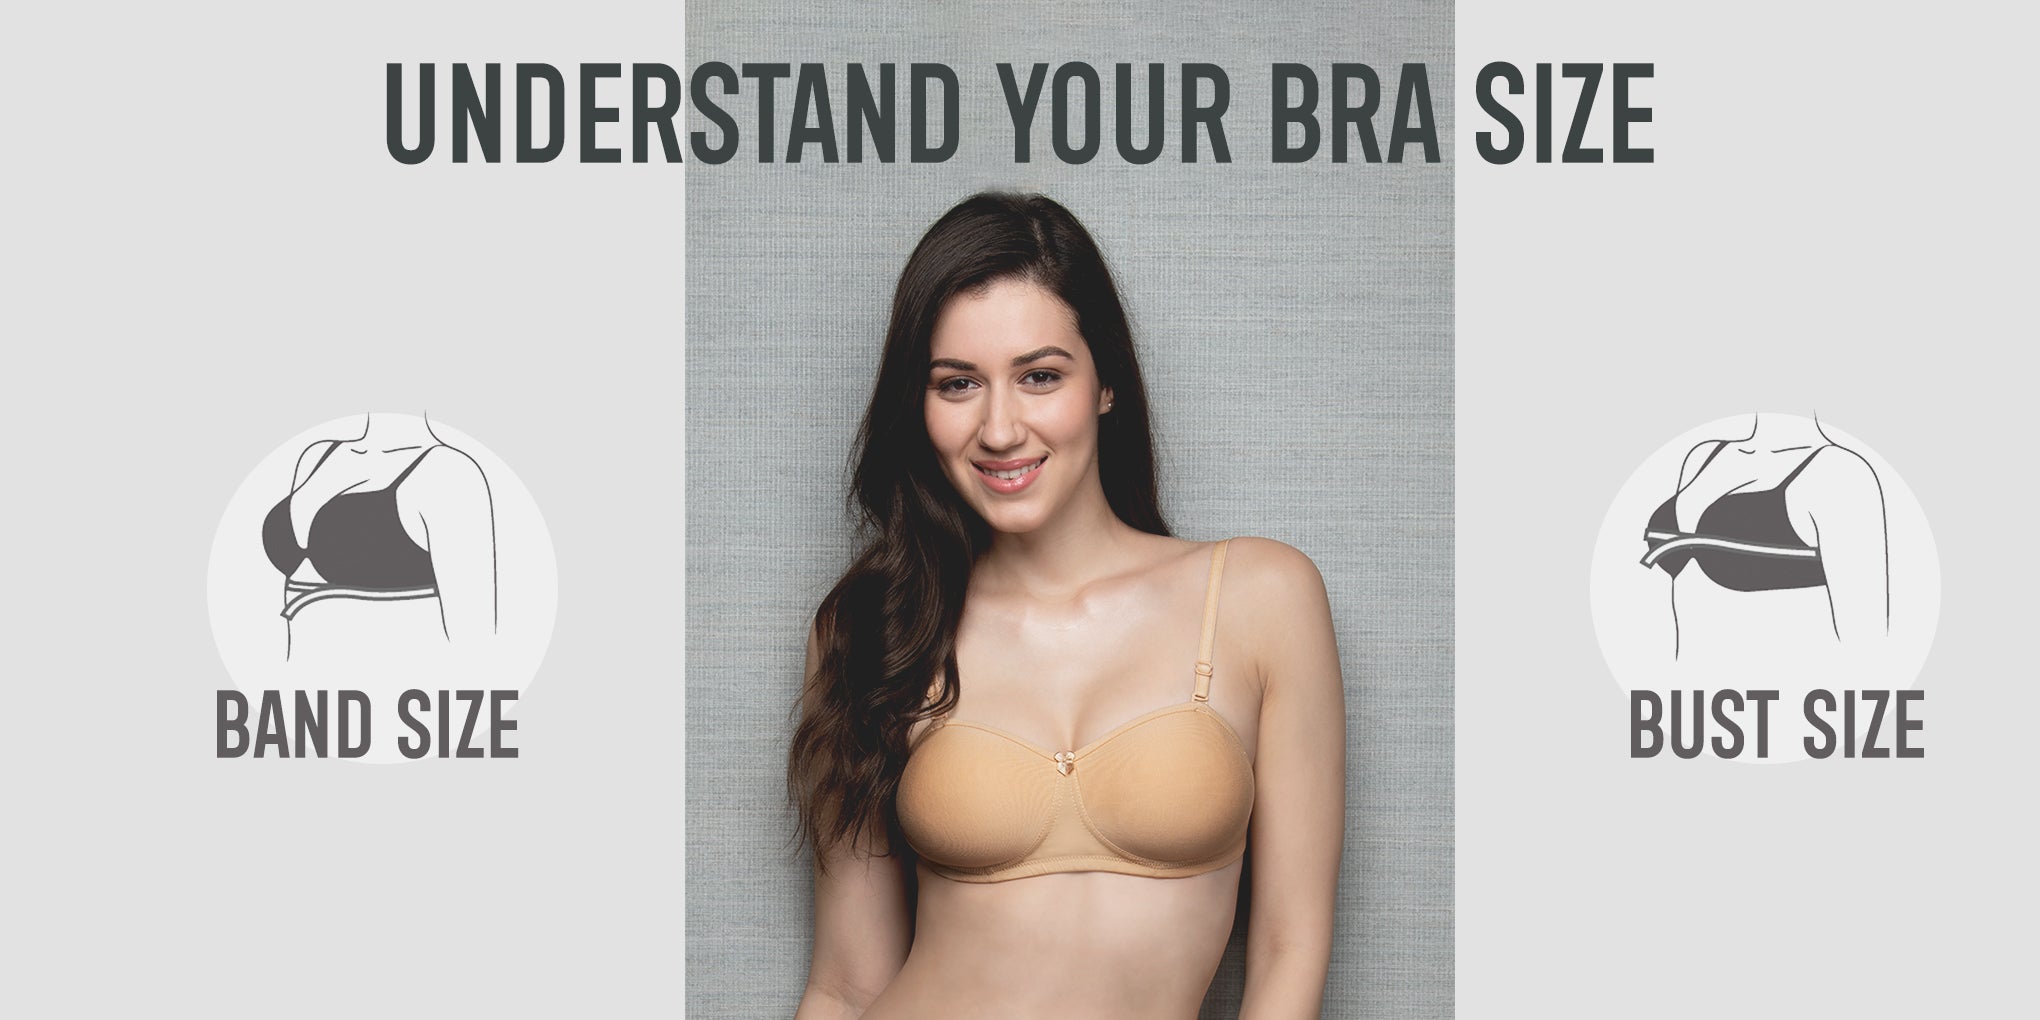 How to Select the Bra for Your Daily Wear? – kalyaniinnerwear